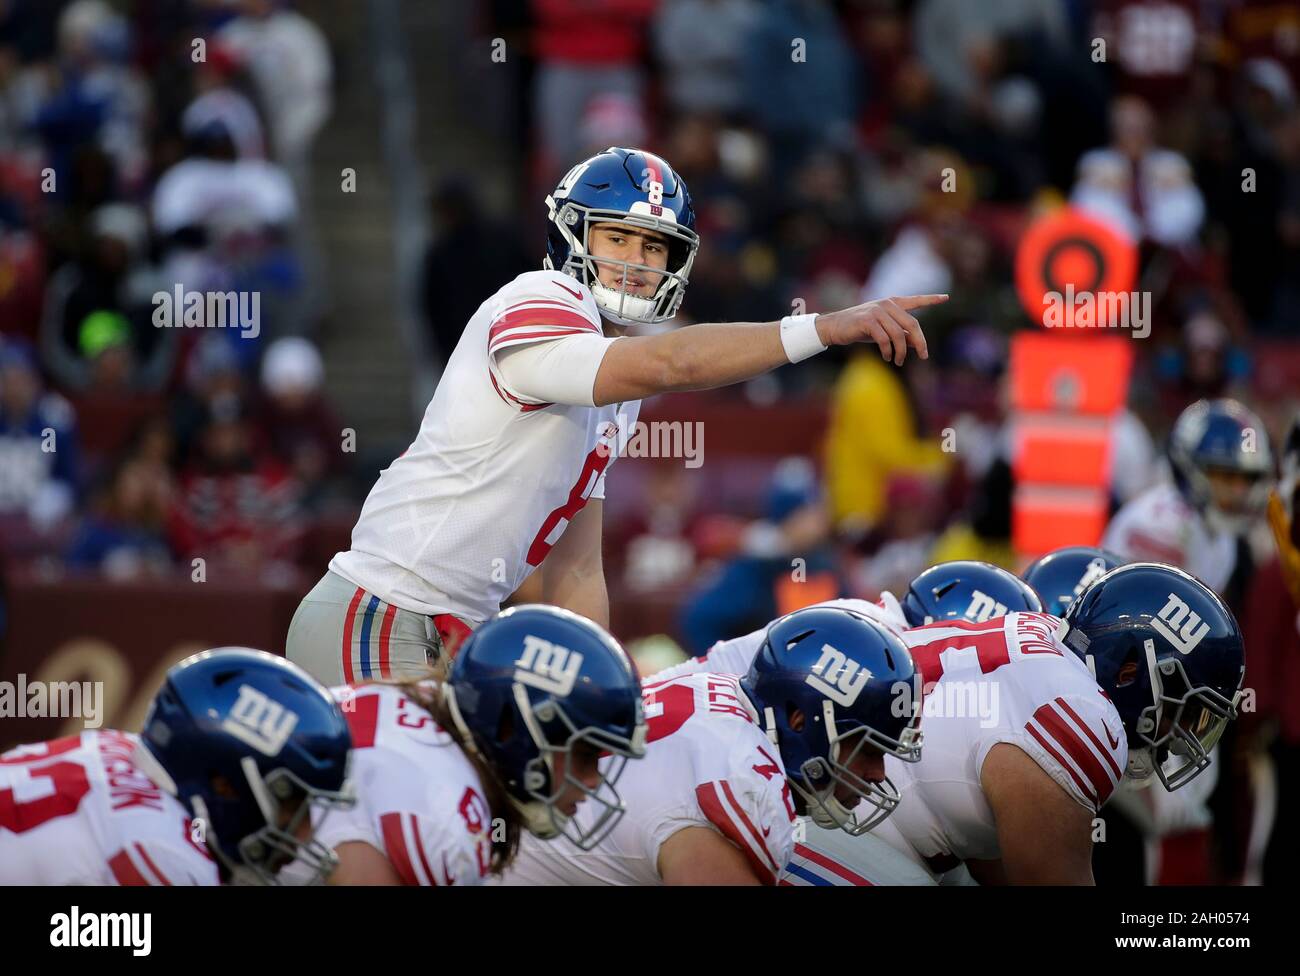 December 22, 2019: New York Giants QB (8) Daniel Jones points out a defense  under center during a NFL football game between the Washington Redskins and the  New York Giants at FedEx